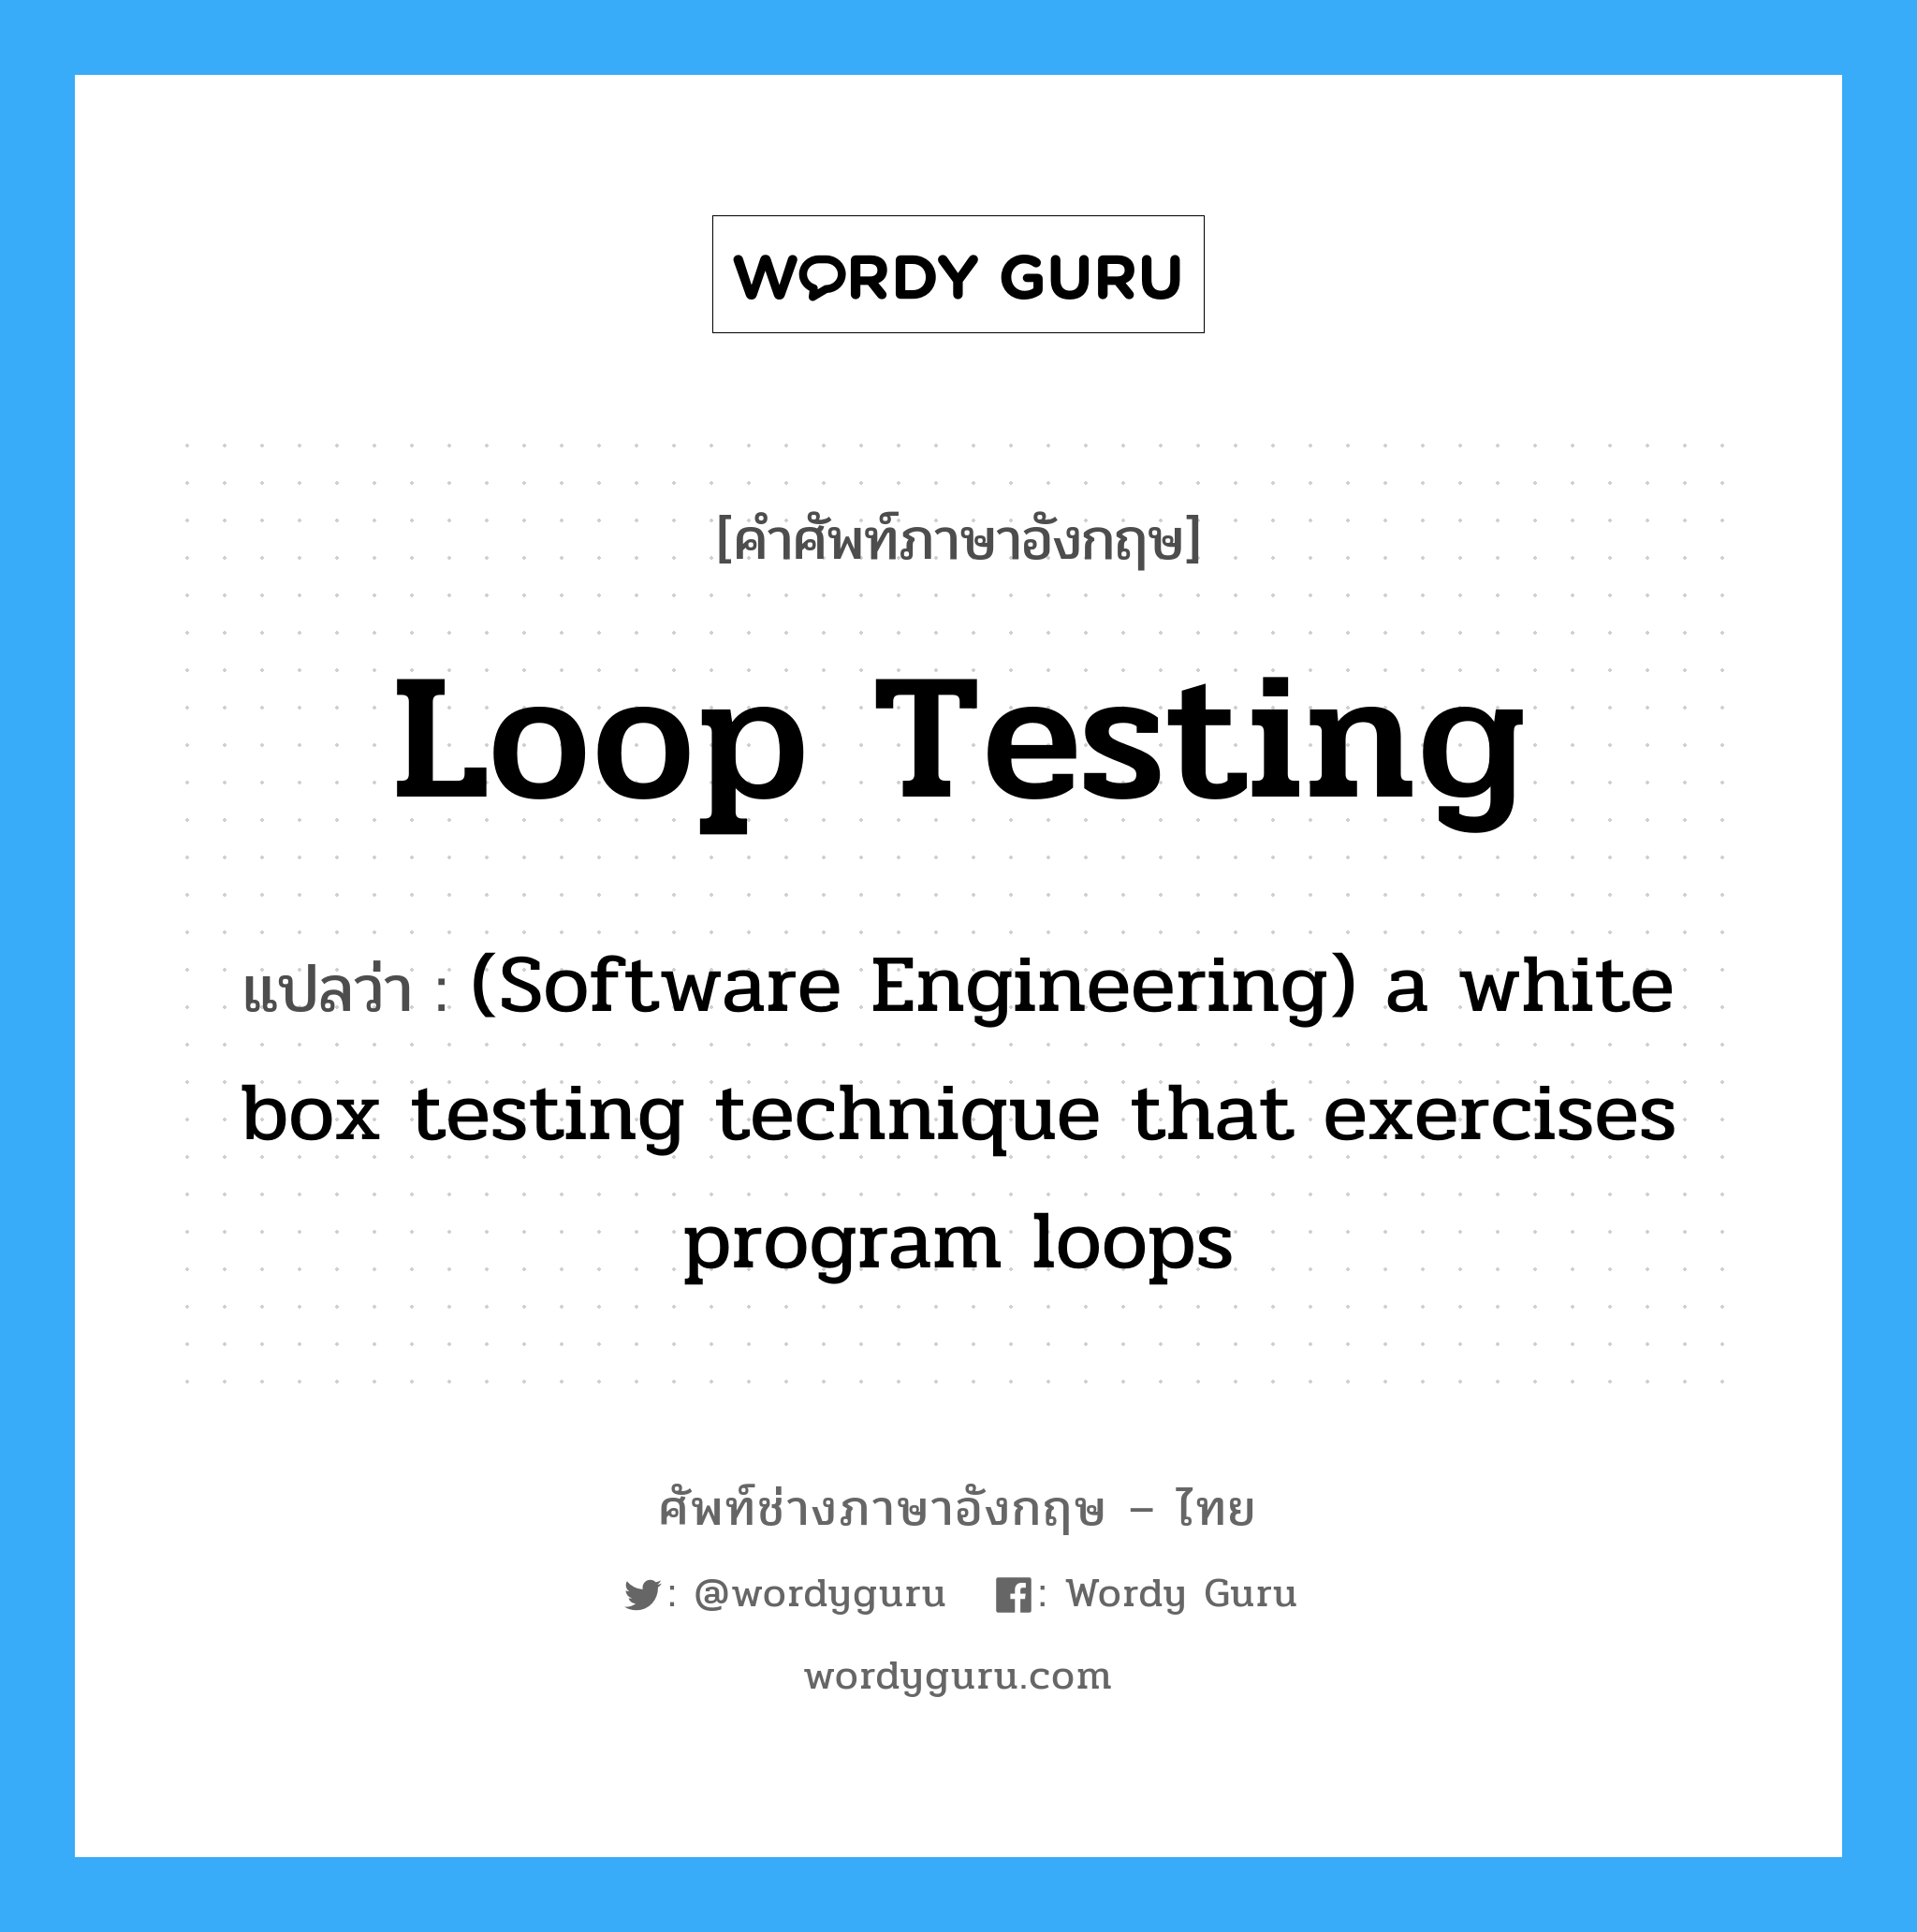 (Software Engineering) a white box testing technique that exercises program loops ภาษาอังกฤษ?, คำศัพท์ช่างภาษาอังกฤษ - ไทย (Software Engineering) a white box testing technique that exercises program loops คำศัพท์ภาษาอังกฤษ (Software Engineering) a white box testing technique that exercises program loops แปลว่า Loop testing